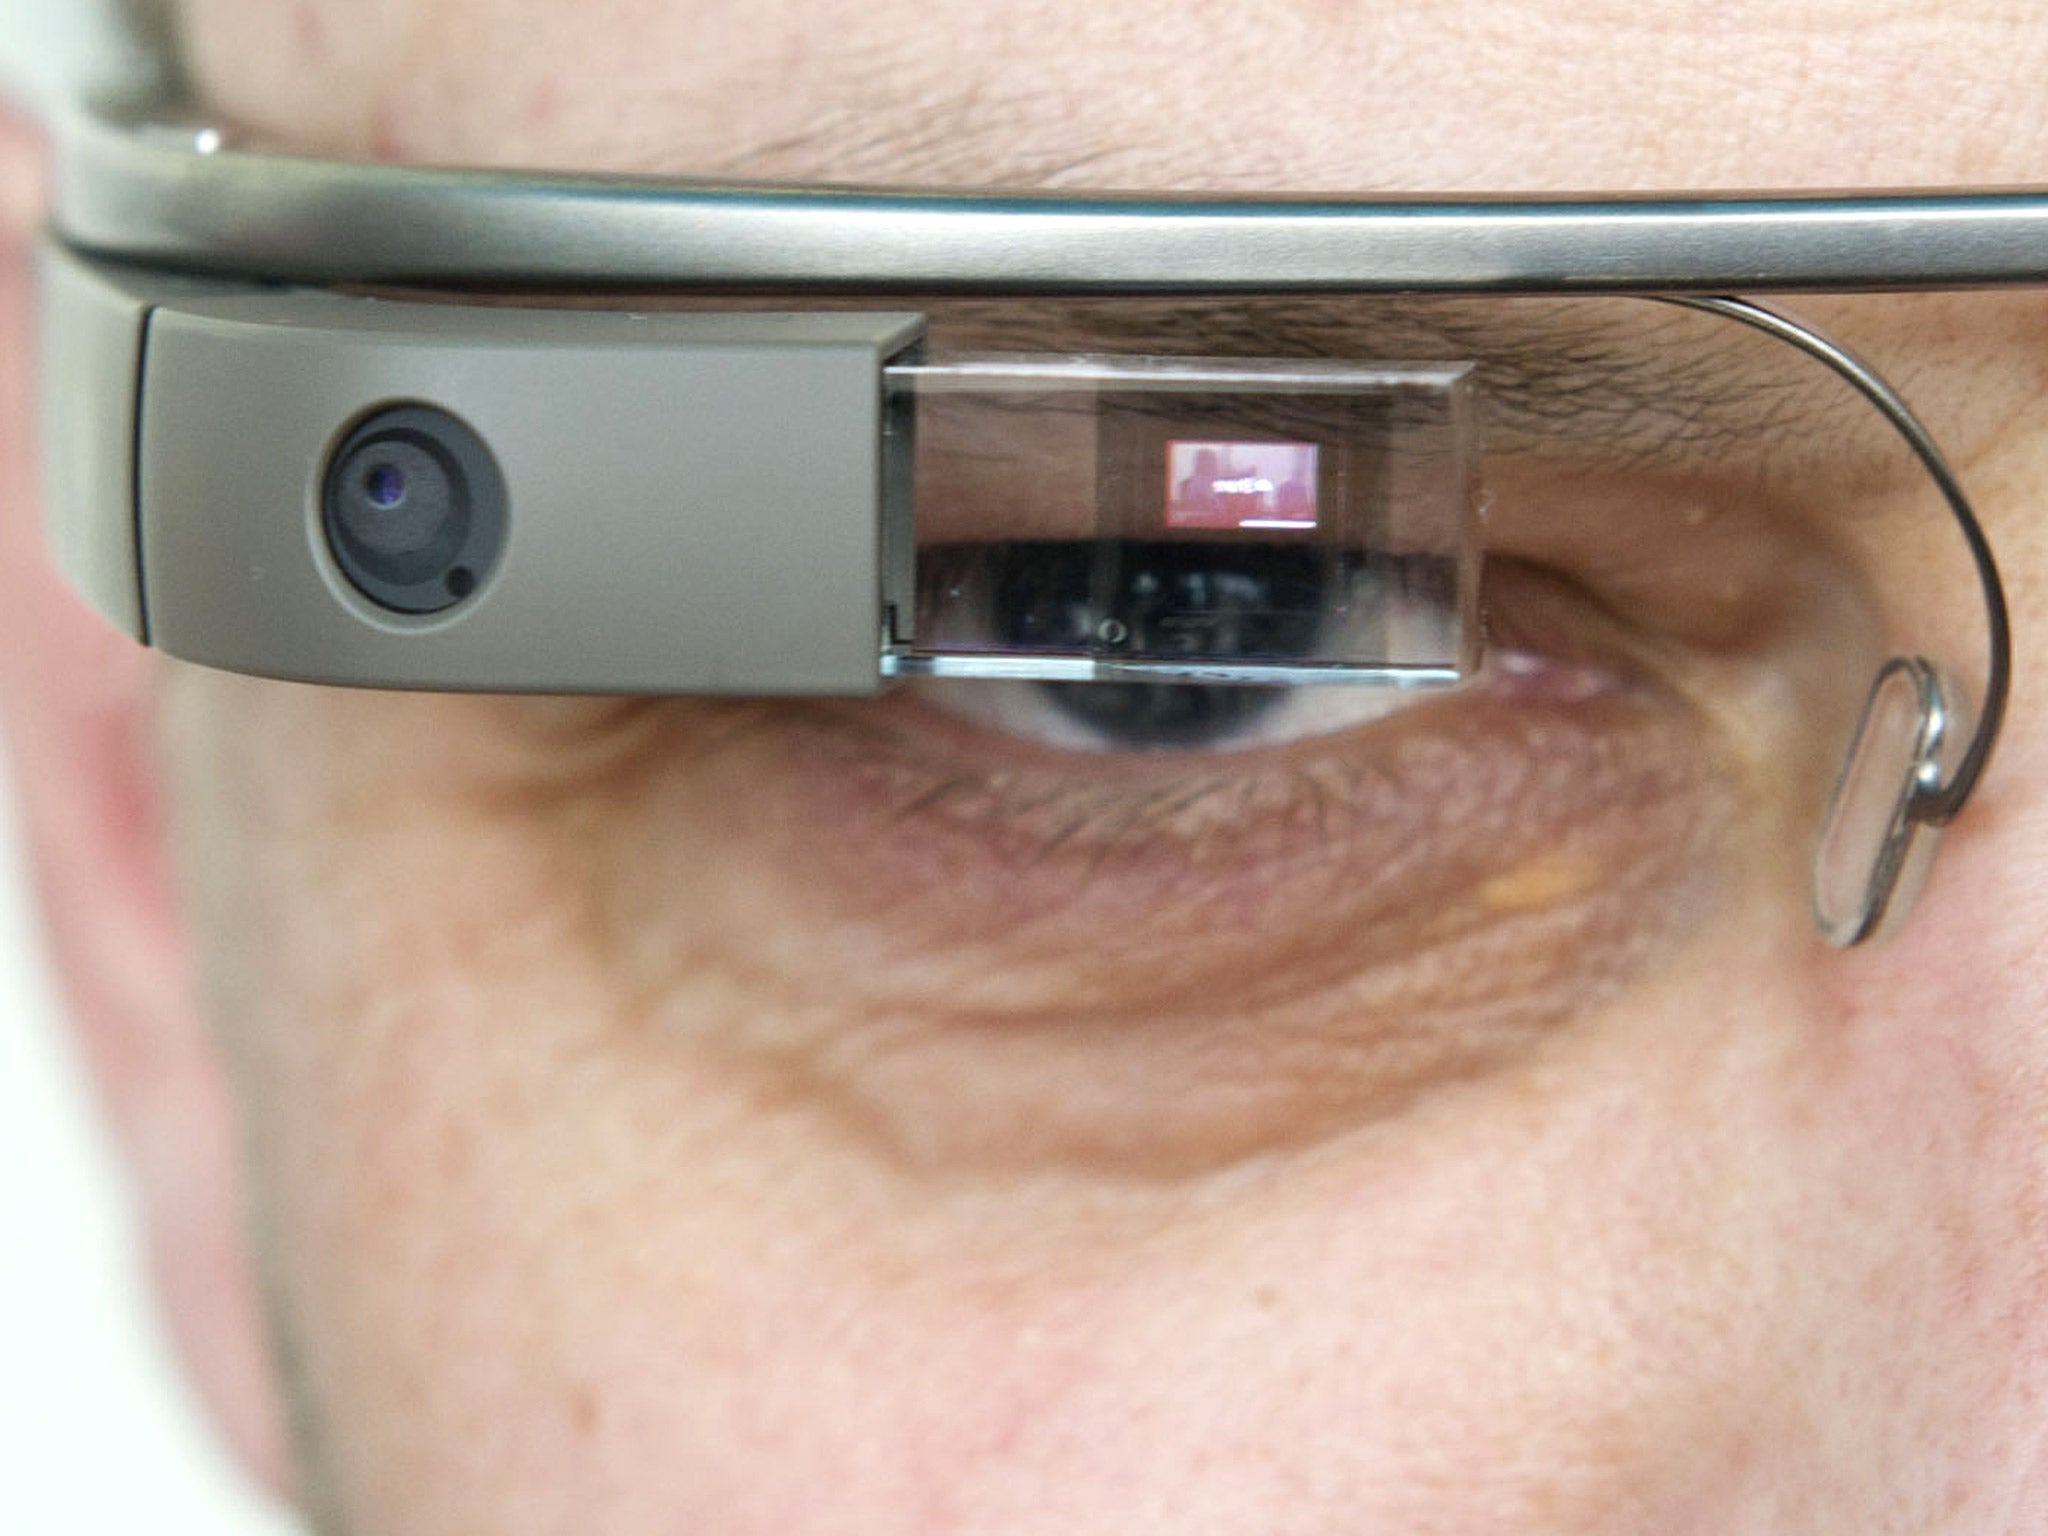 Google Glasses will make suggestions based on what you’re seeing